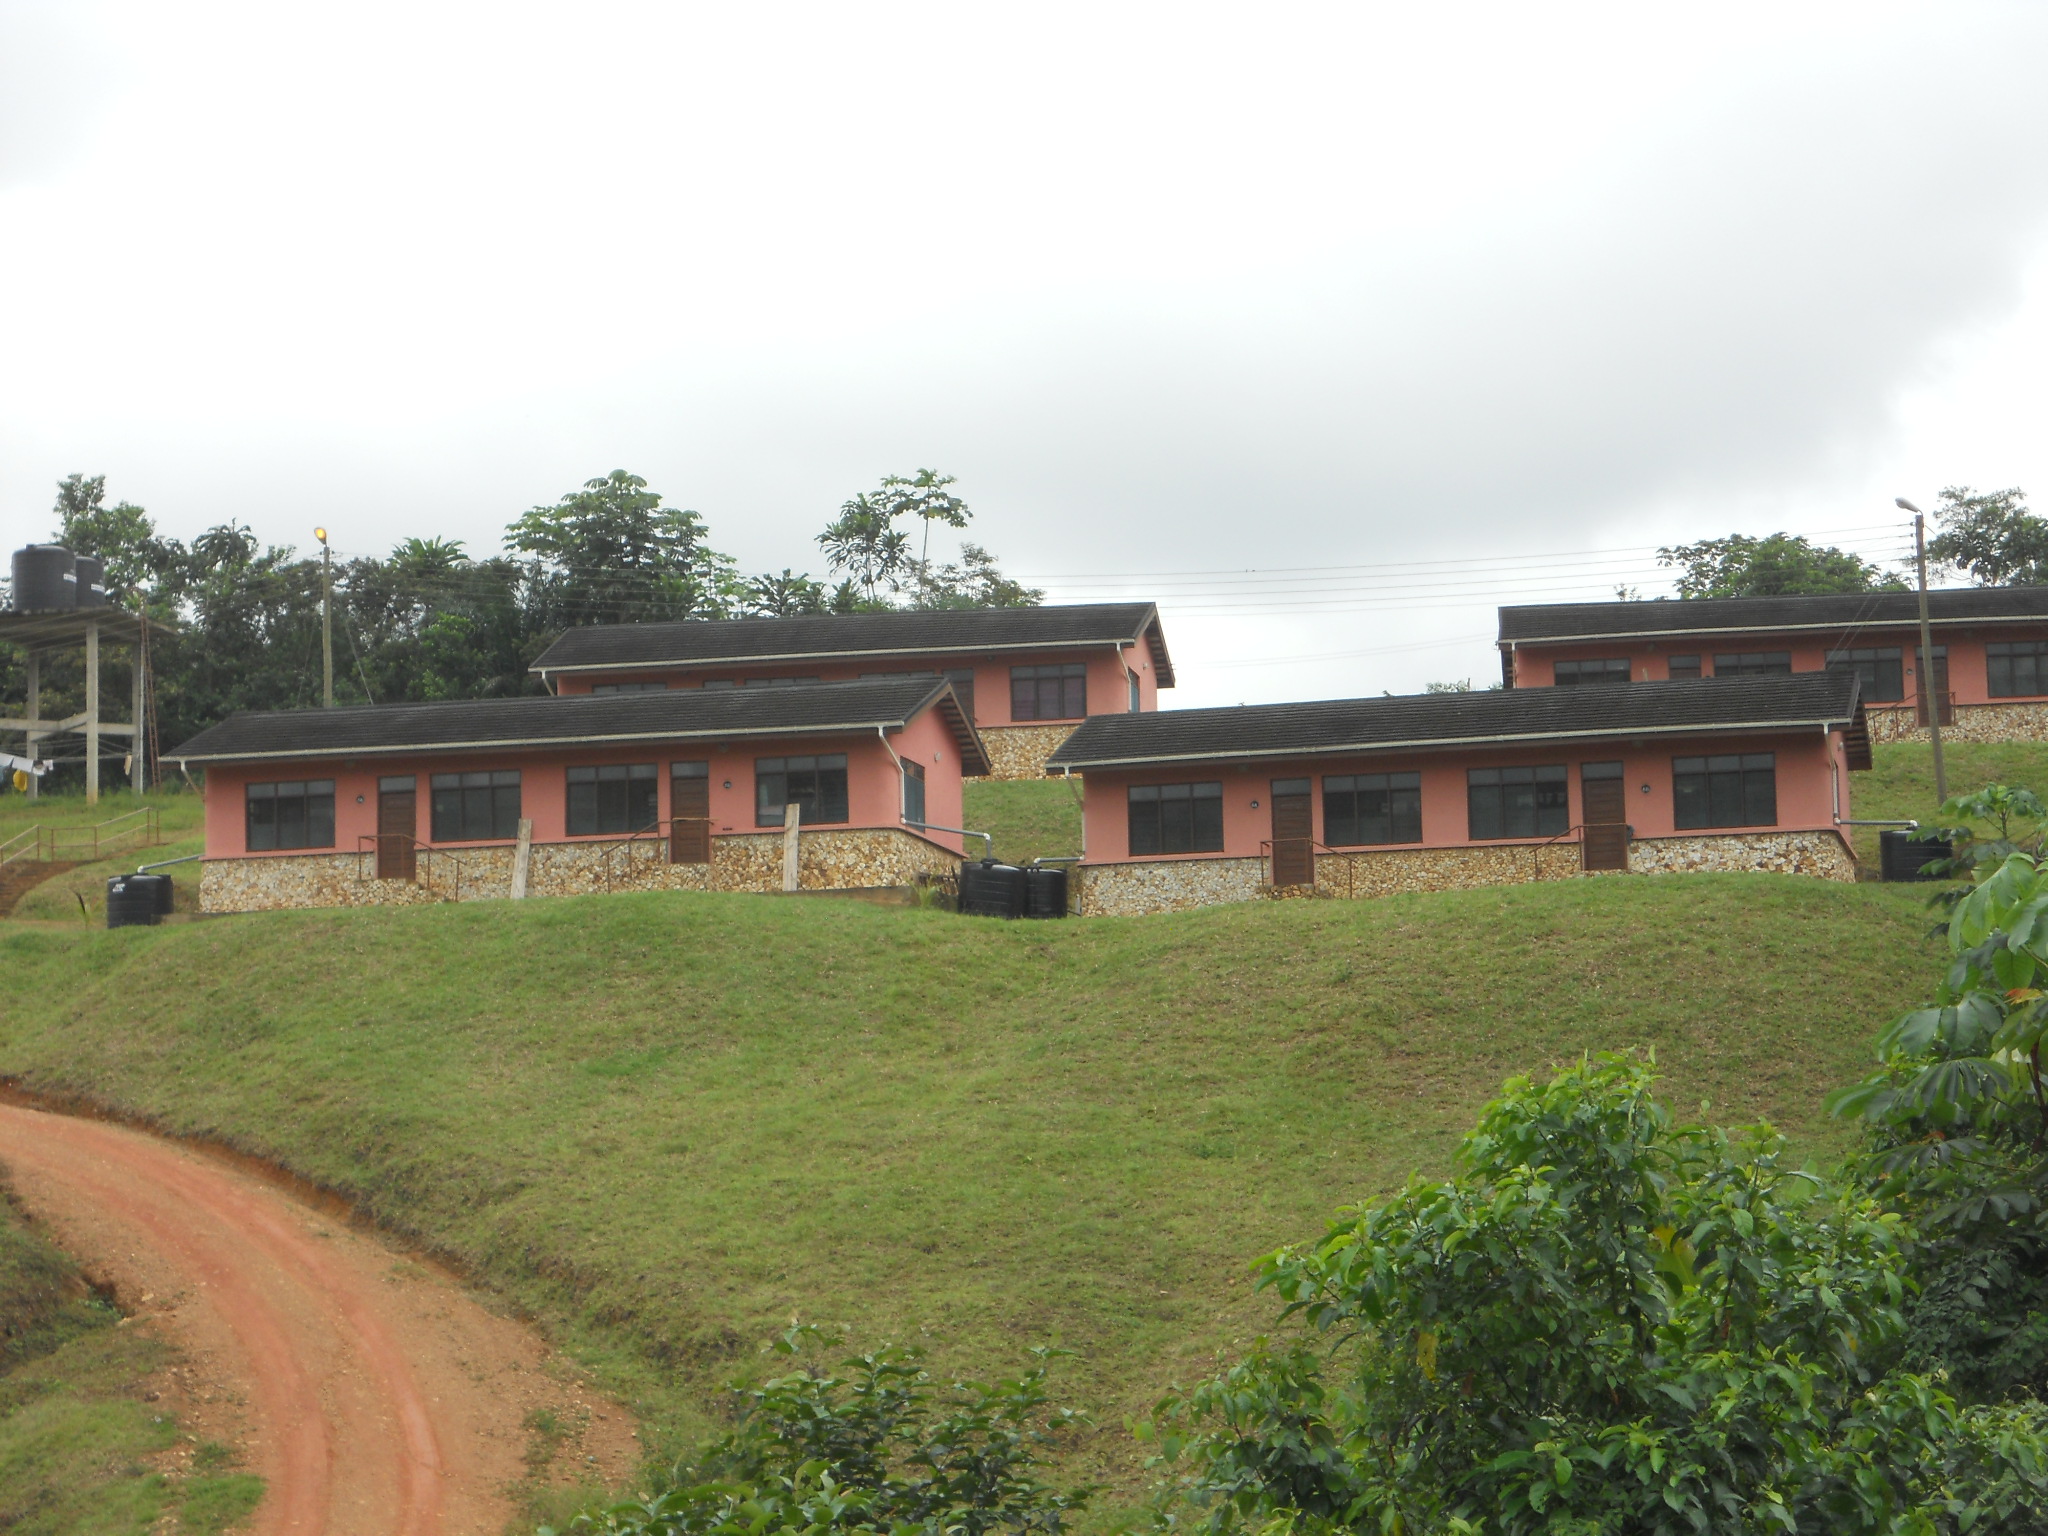 <p>S. Tetteh + Associates Architects, Accra, Ghana. Low-cost housing project for rangers and conservation staff at the Bia and Ankasa Reserves, Juabeso-Bia district, southwest Ghana.</p>
